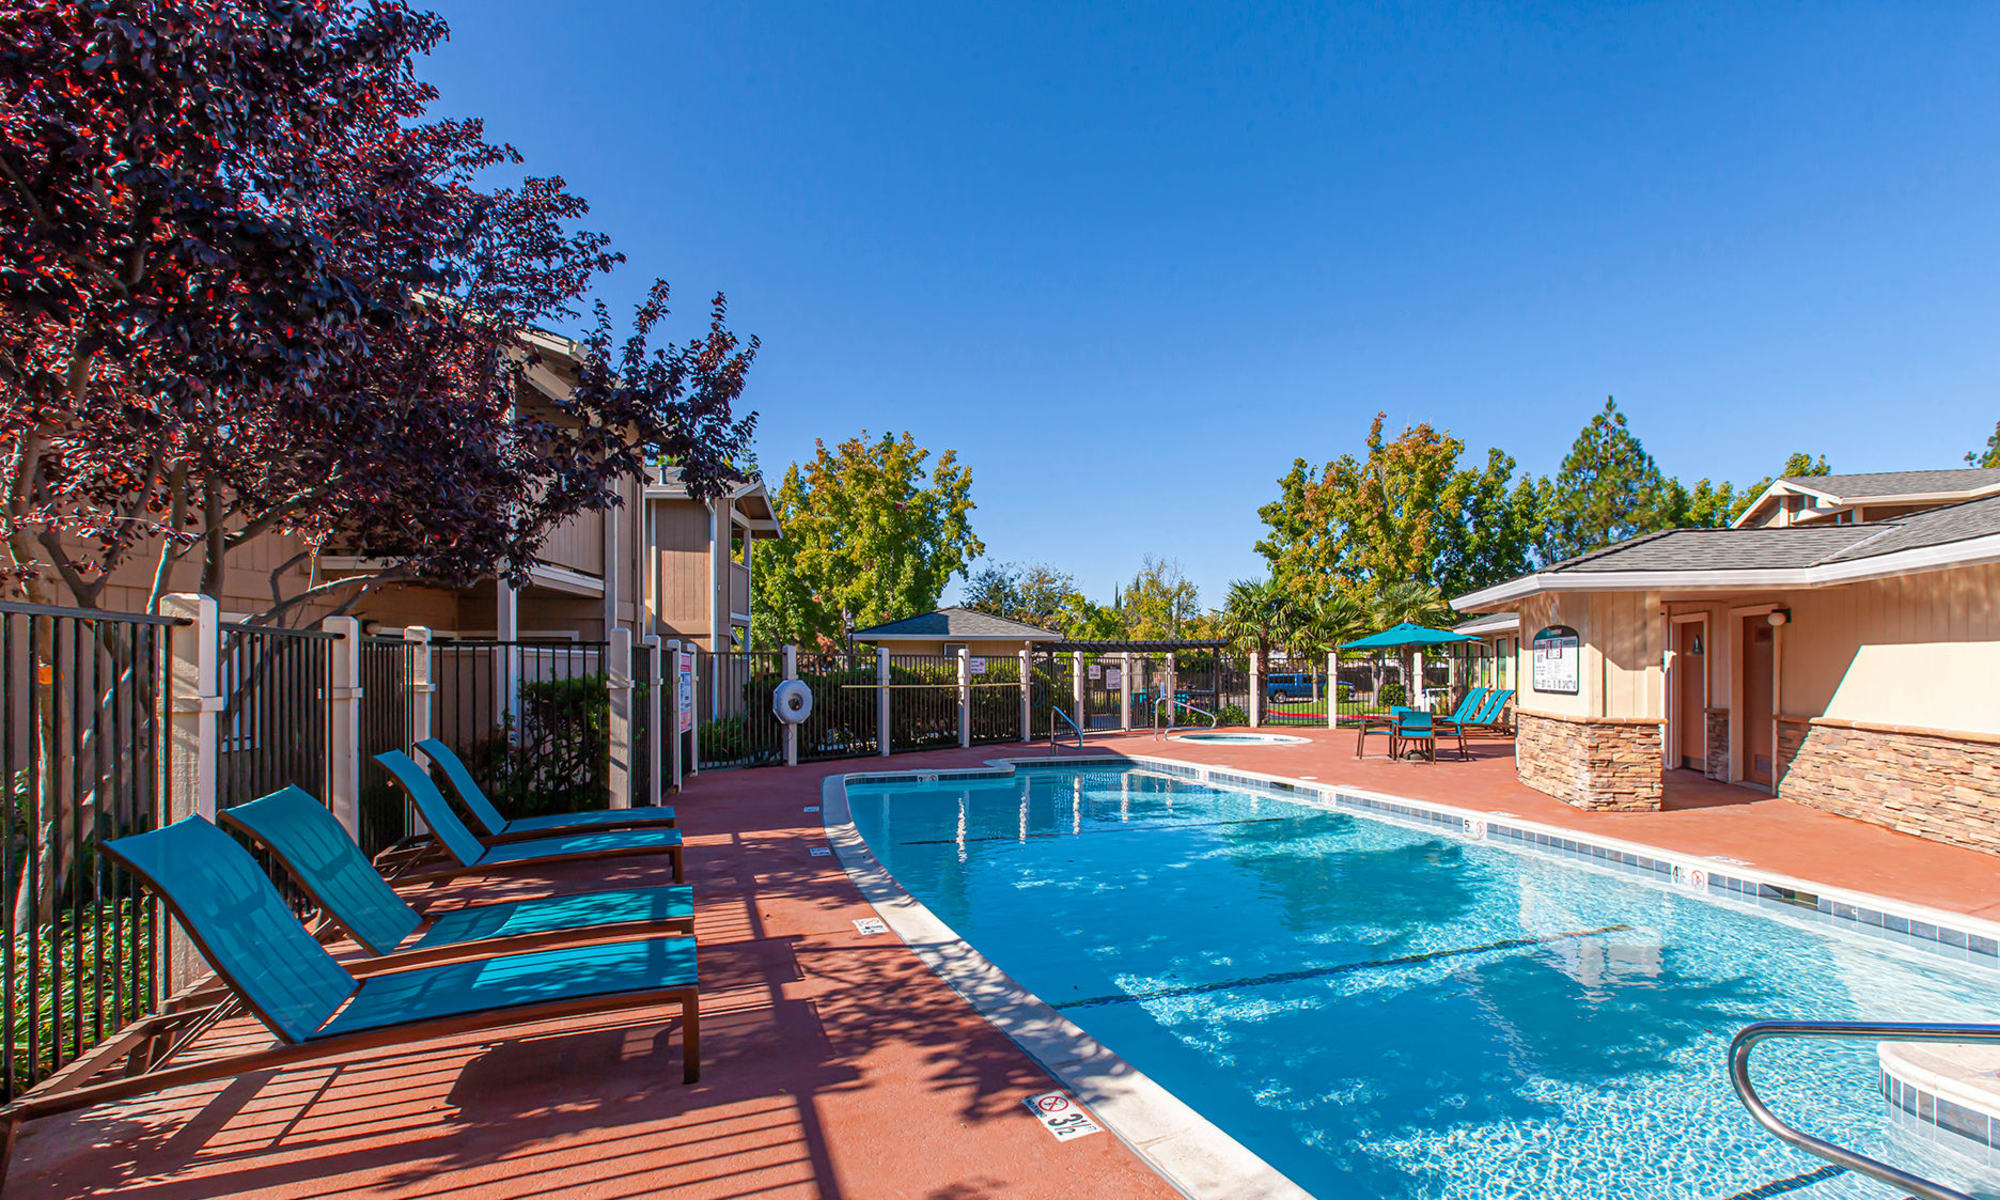 Sparkling Pool area with lounge chairs  in Vacaville, CA